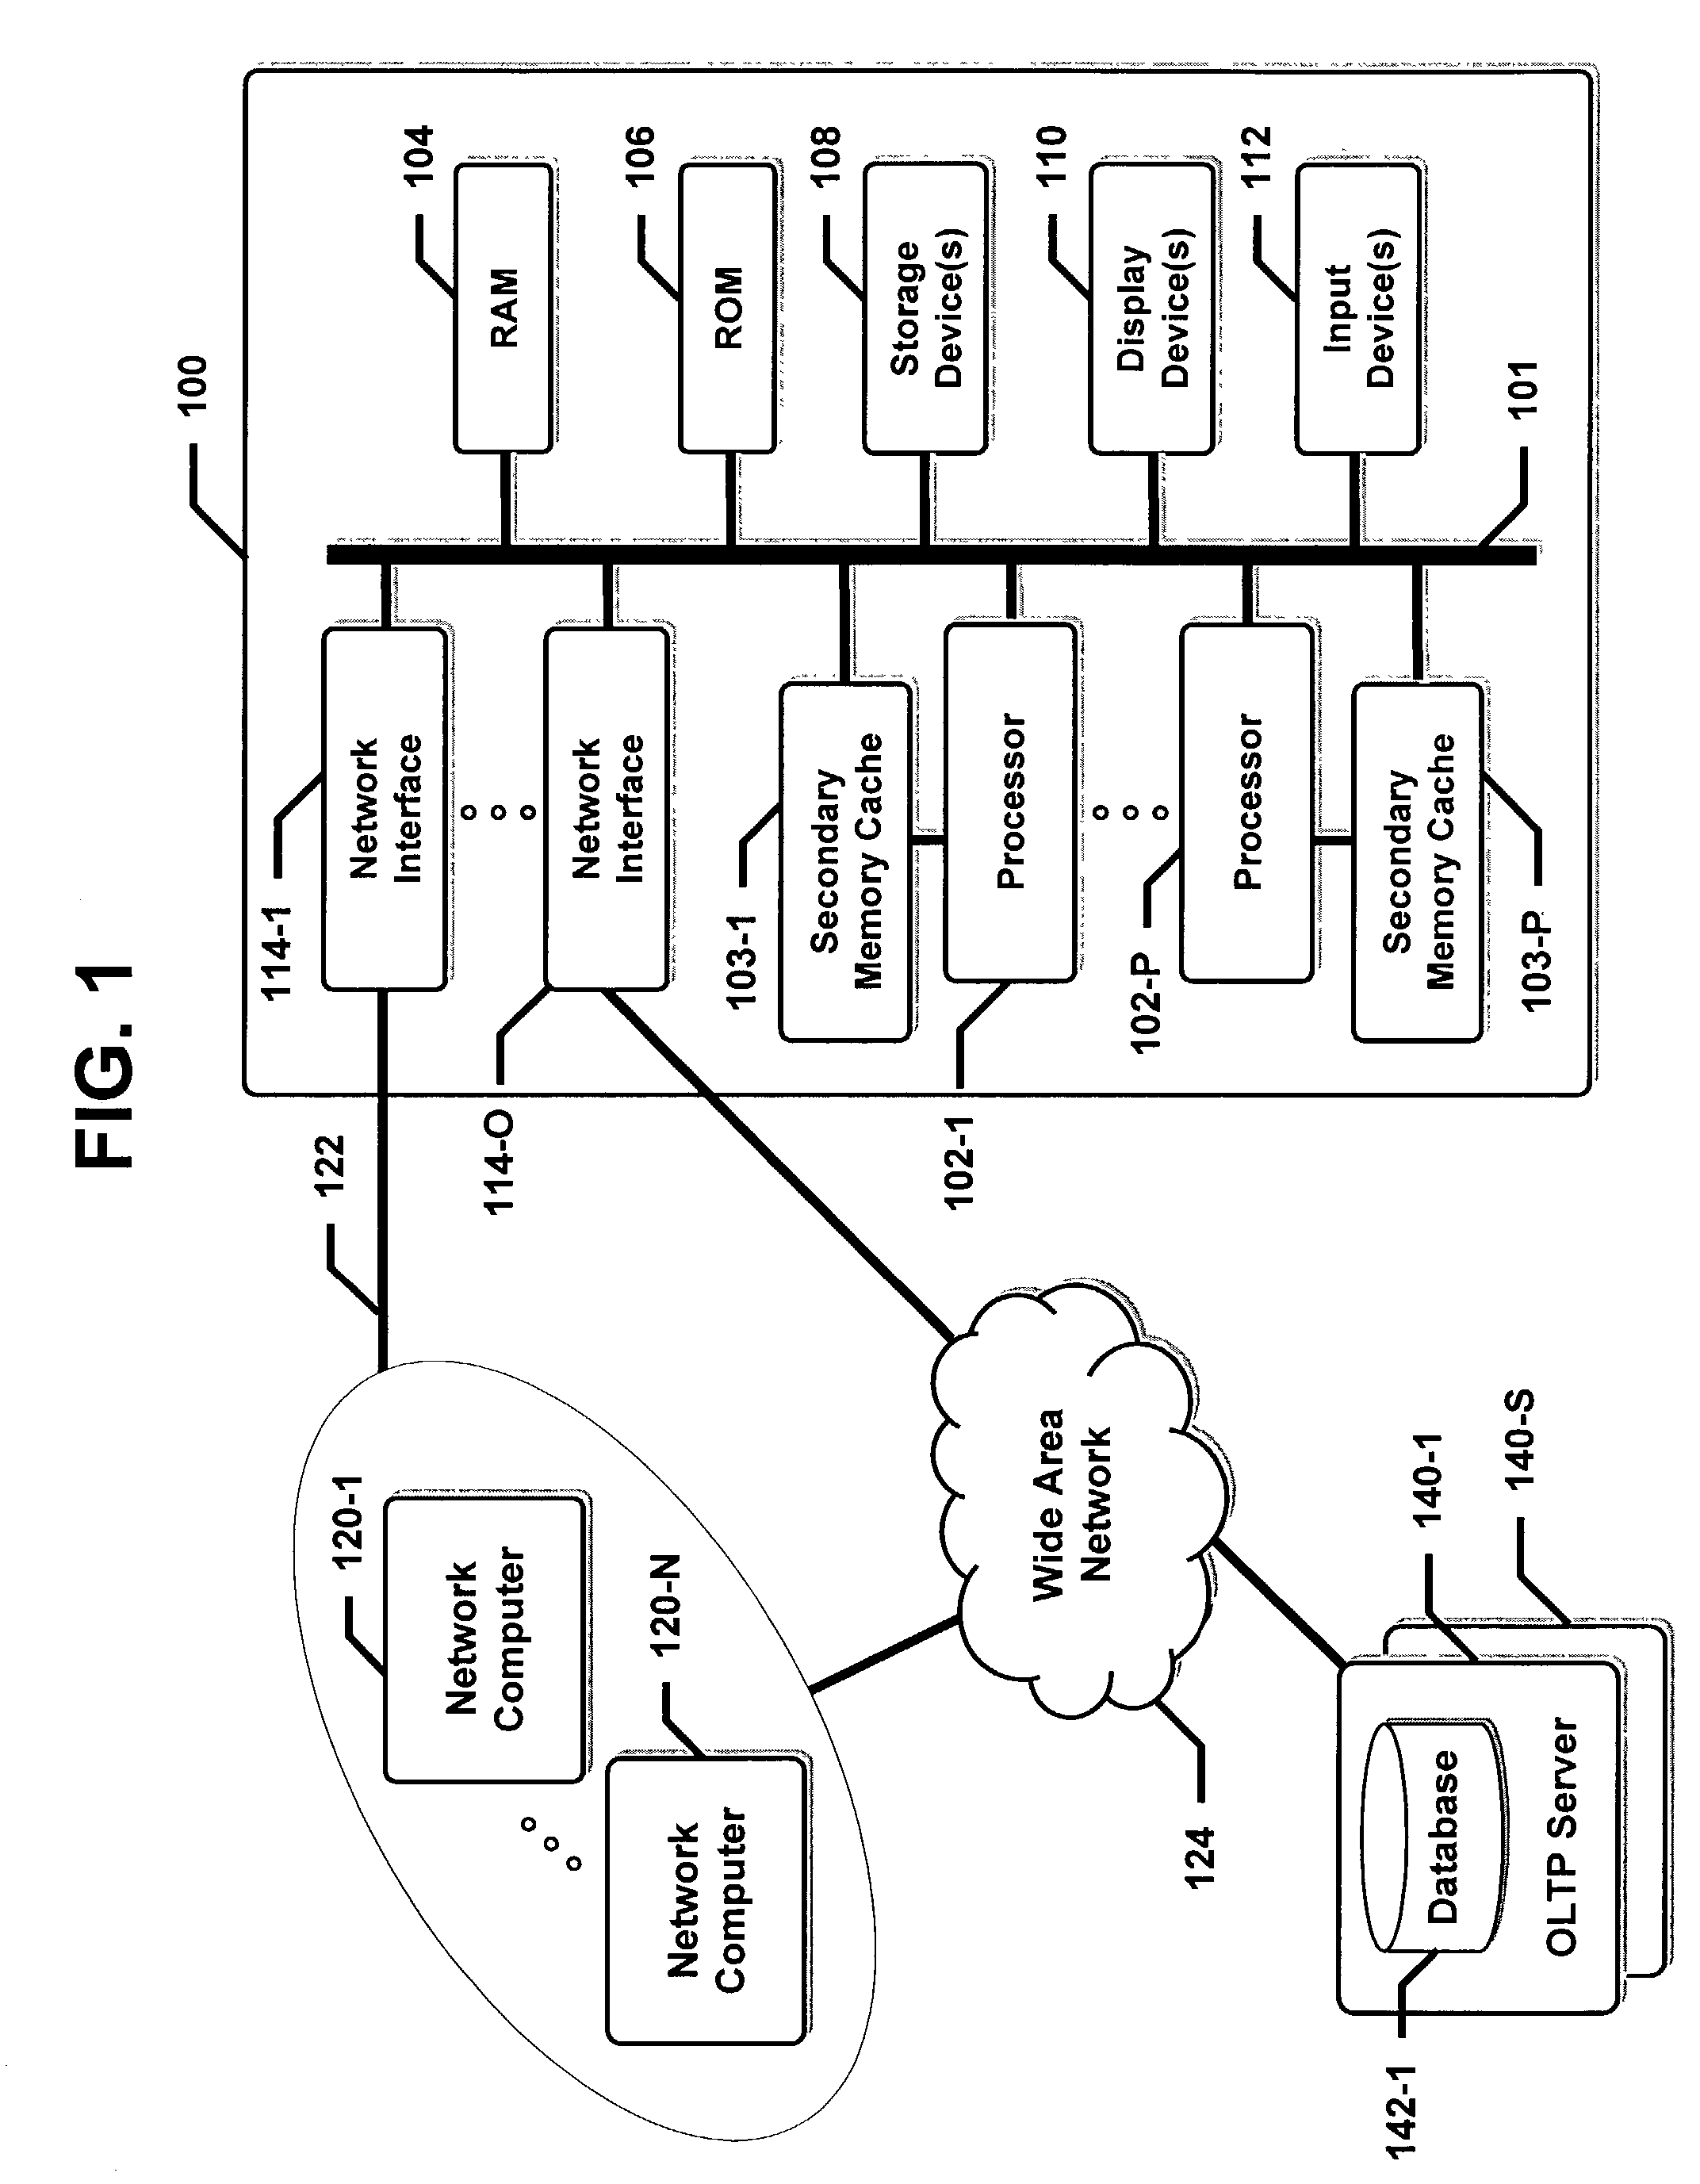 Method and system for validating remote database updates